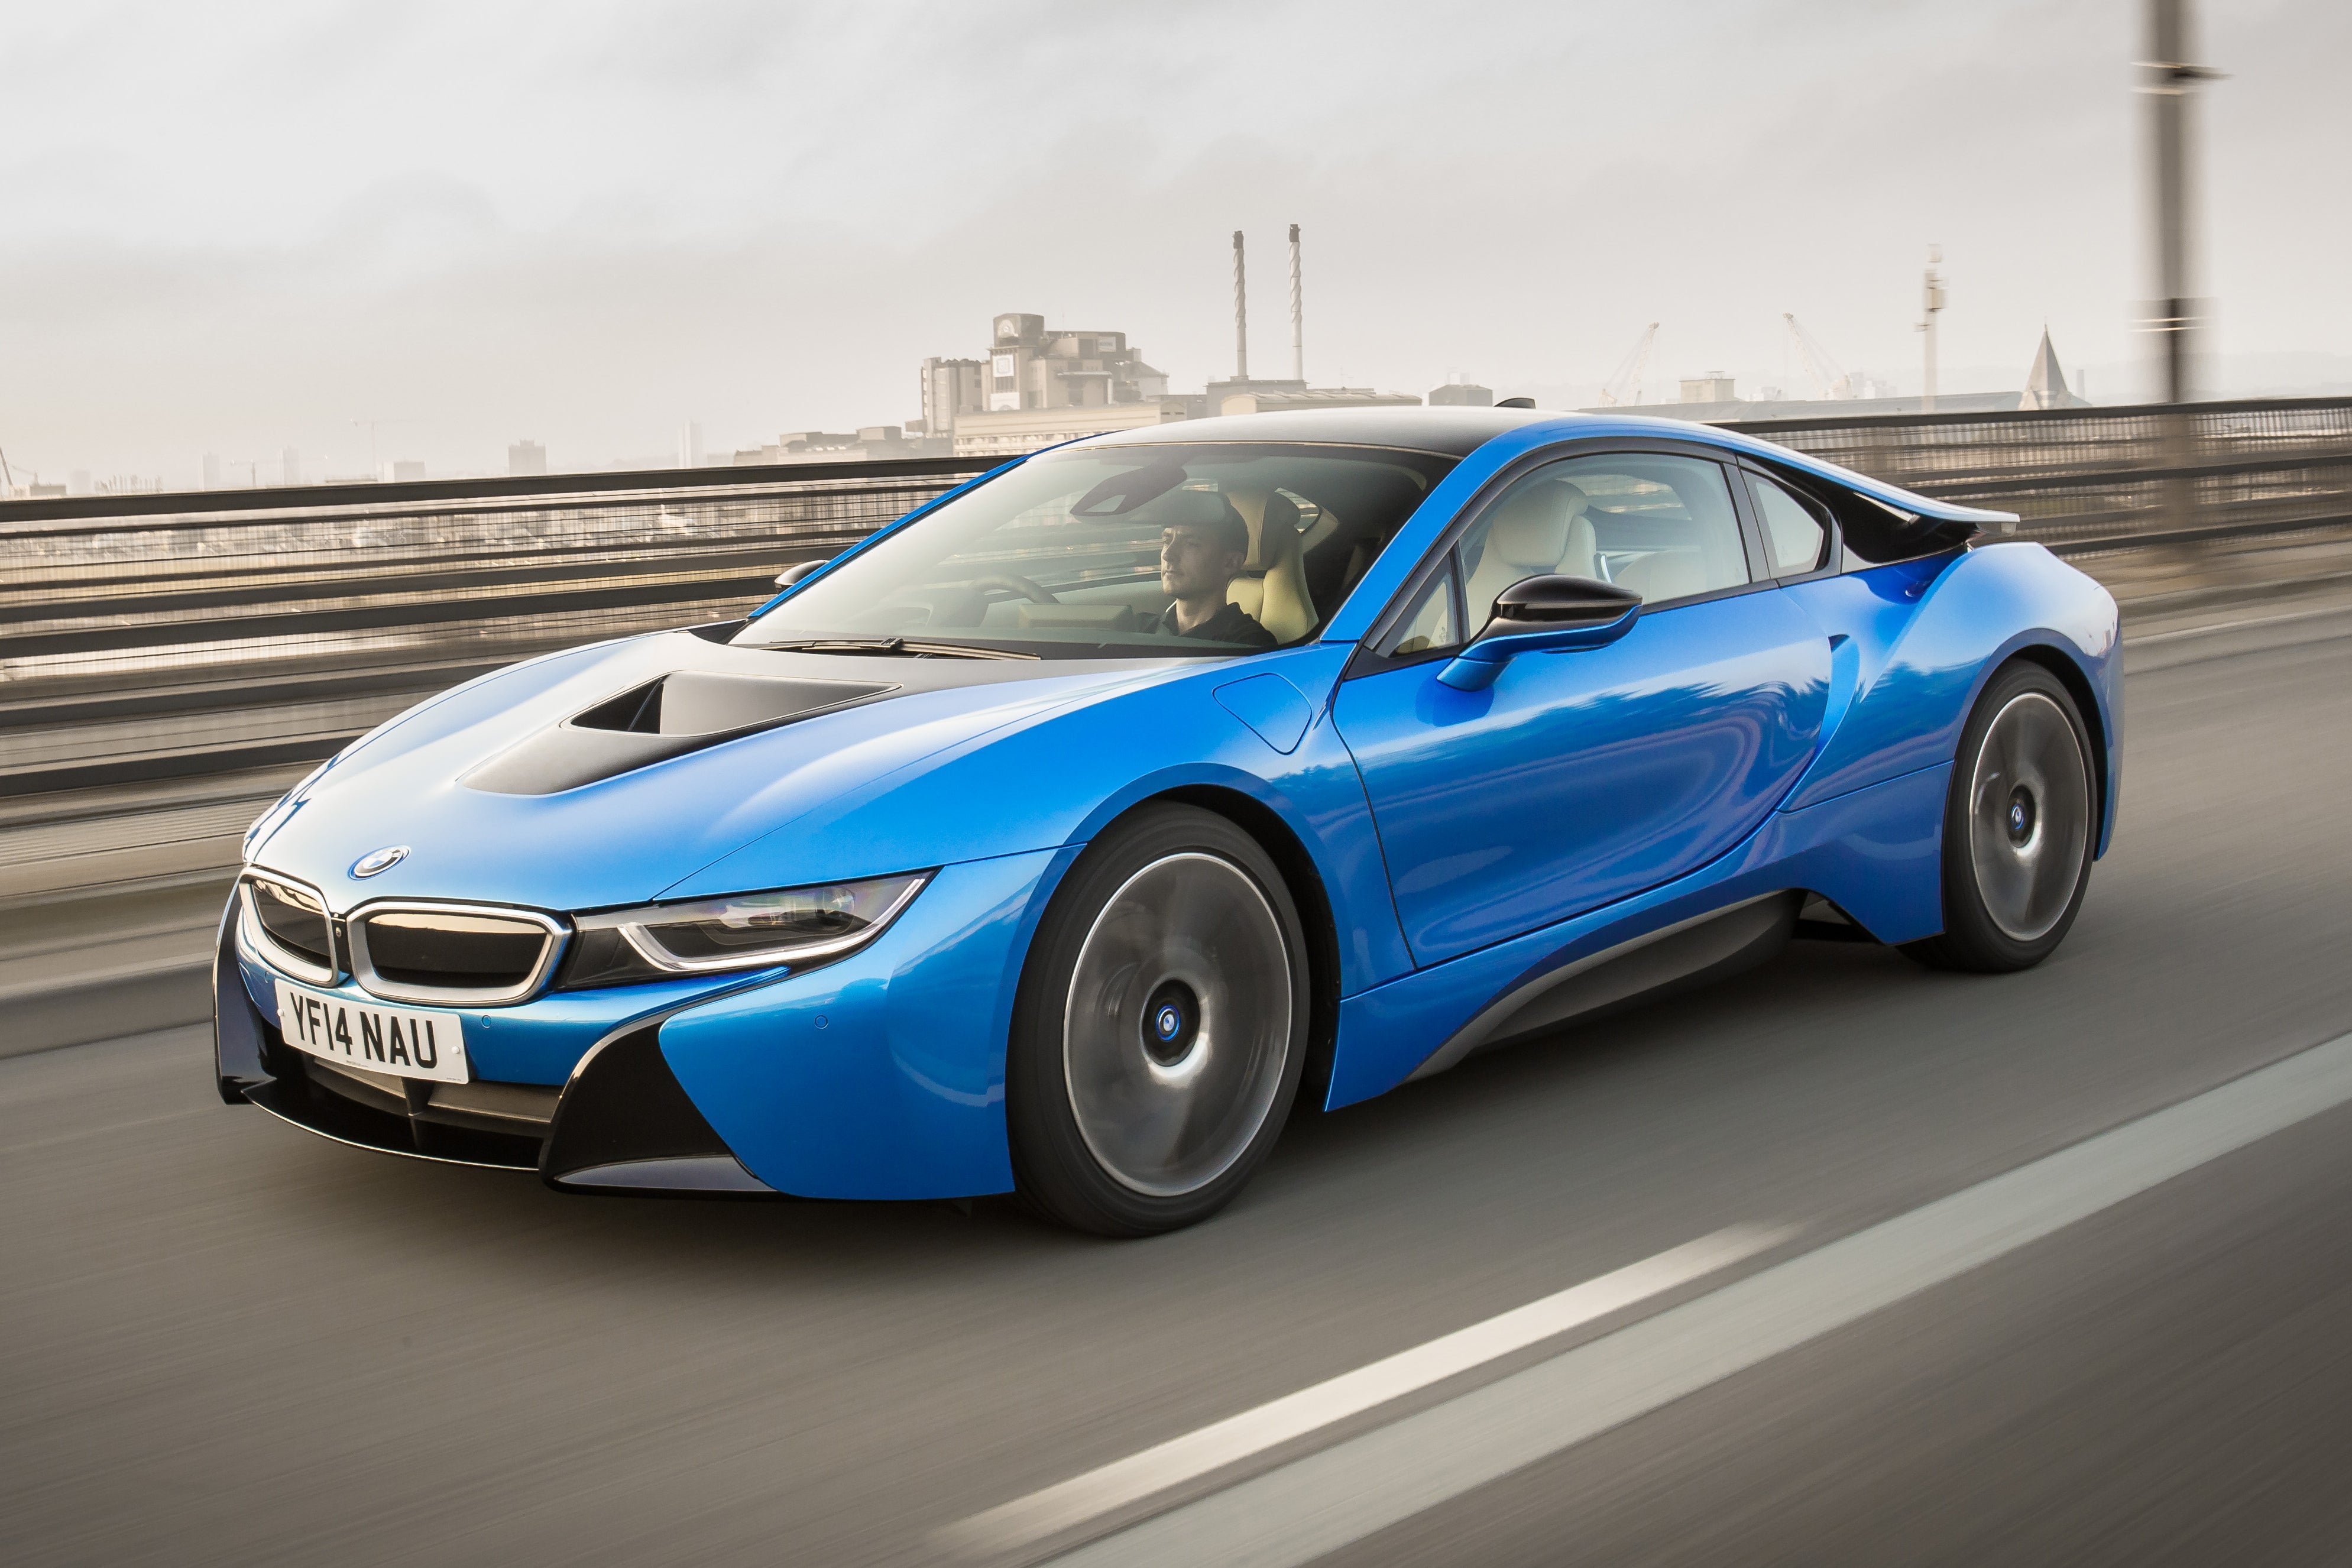 BMW i8 (2014-2020) Review: exterior front three quarter photo of the BMW i8 on the road 